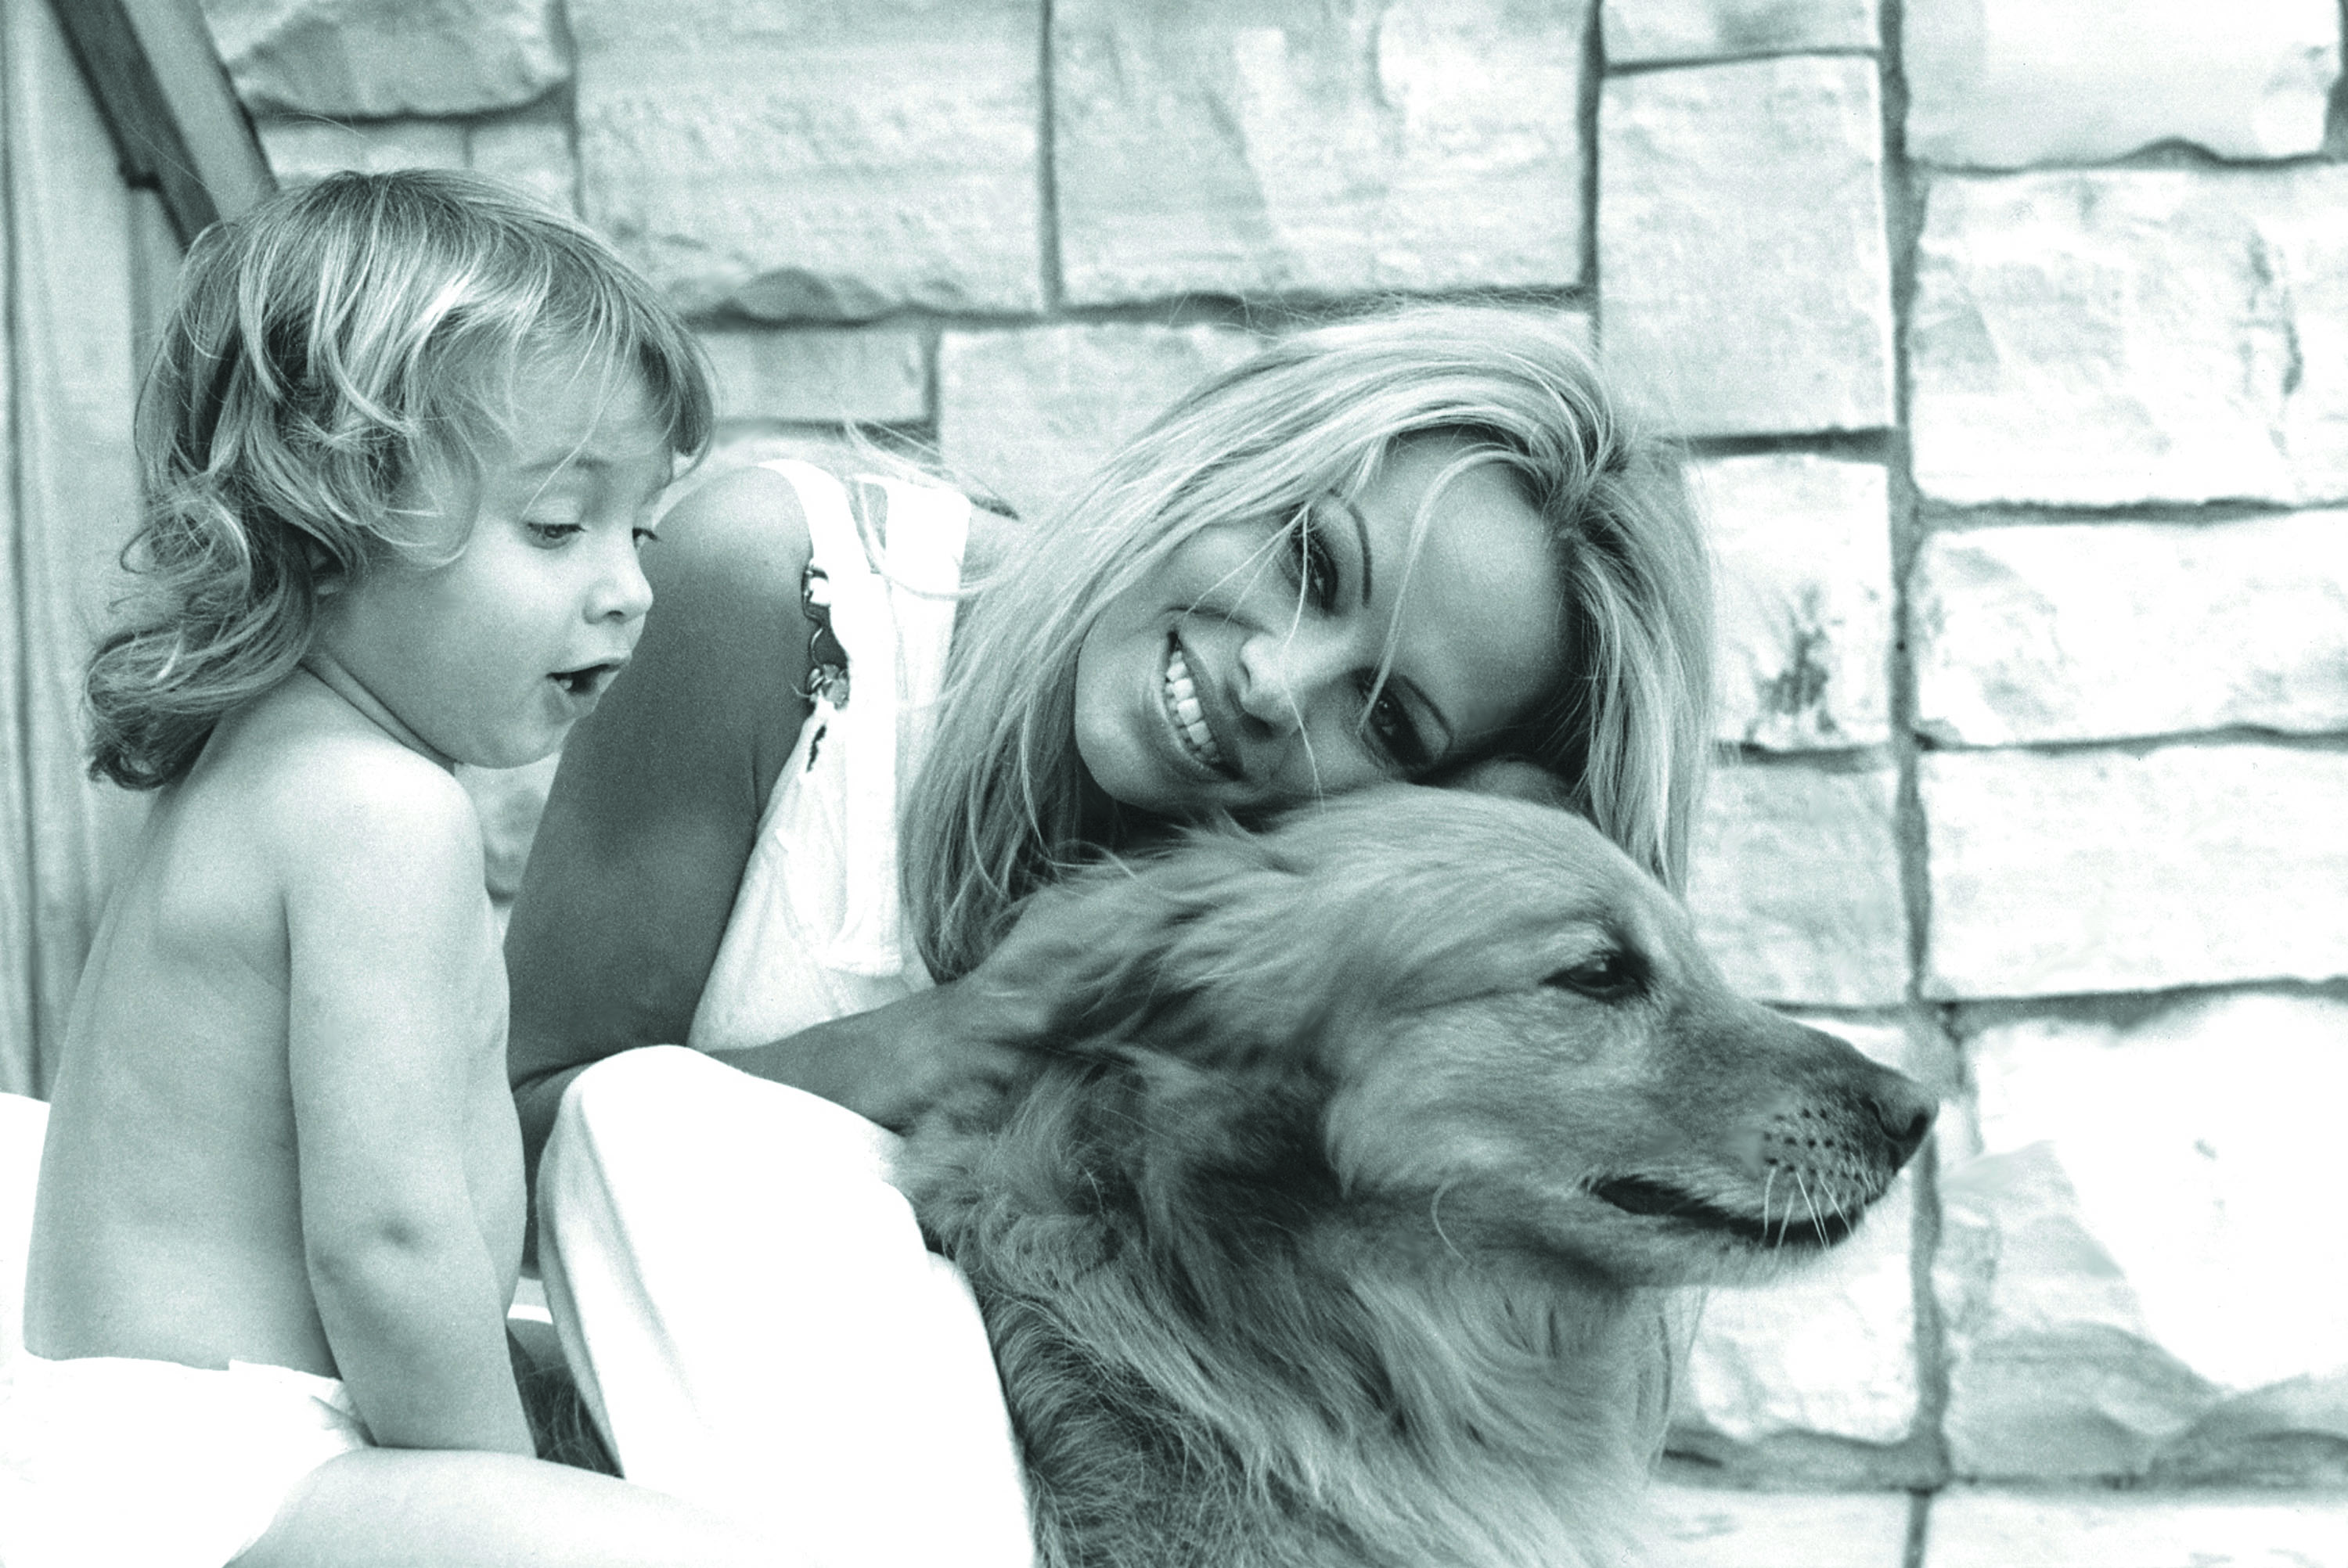 Pamela Anderson, Dylan Lee and her golden retriever Superstar pictured in the backyard of their home in Los Angeles, California on May 1, 2002 | Source: Getty Images